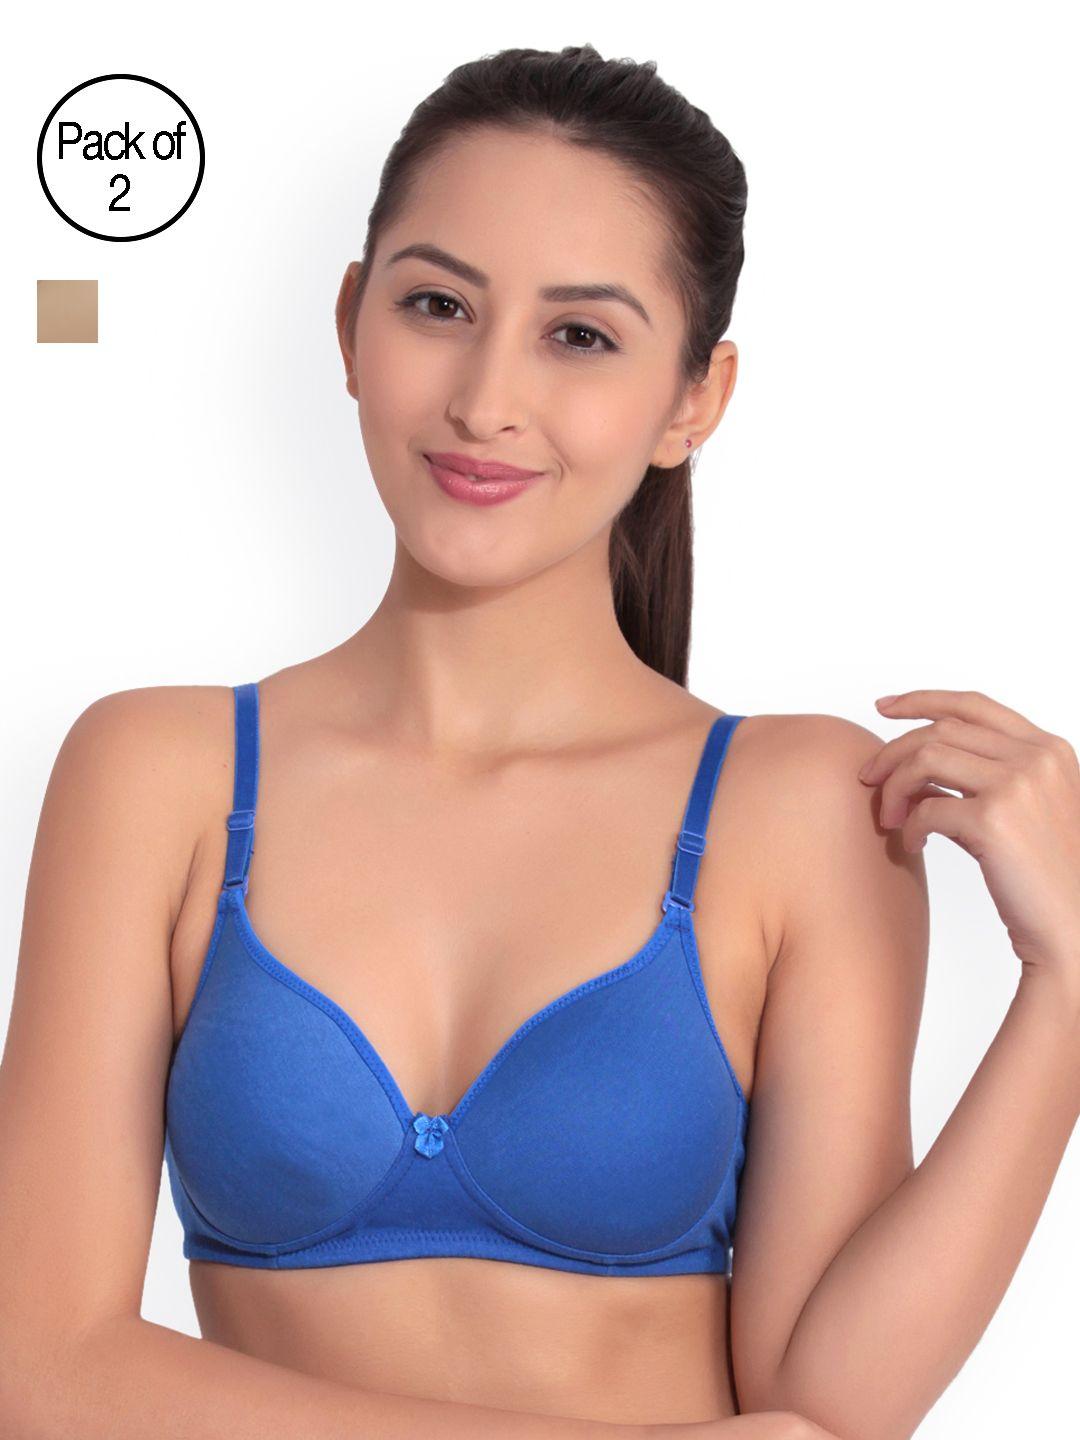 floret-pack-of-2-solid-non-wired-heavily-padded-push-up-bra-t3010_nude-blue_40b